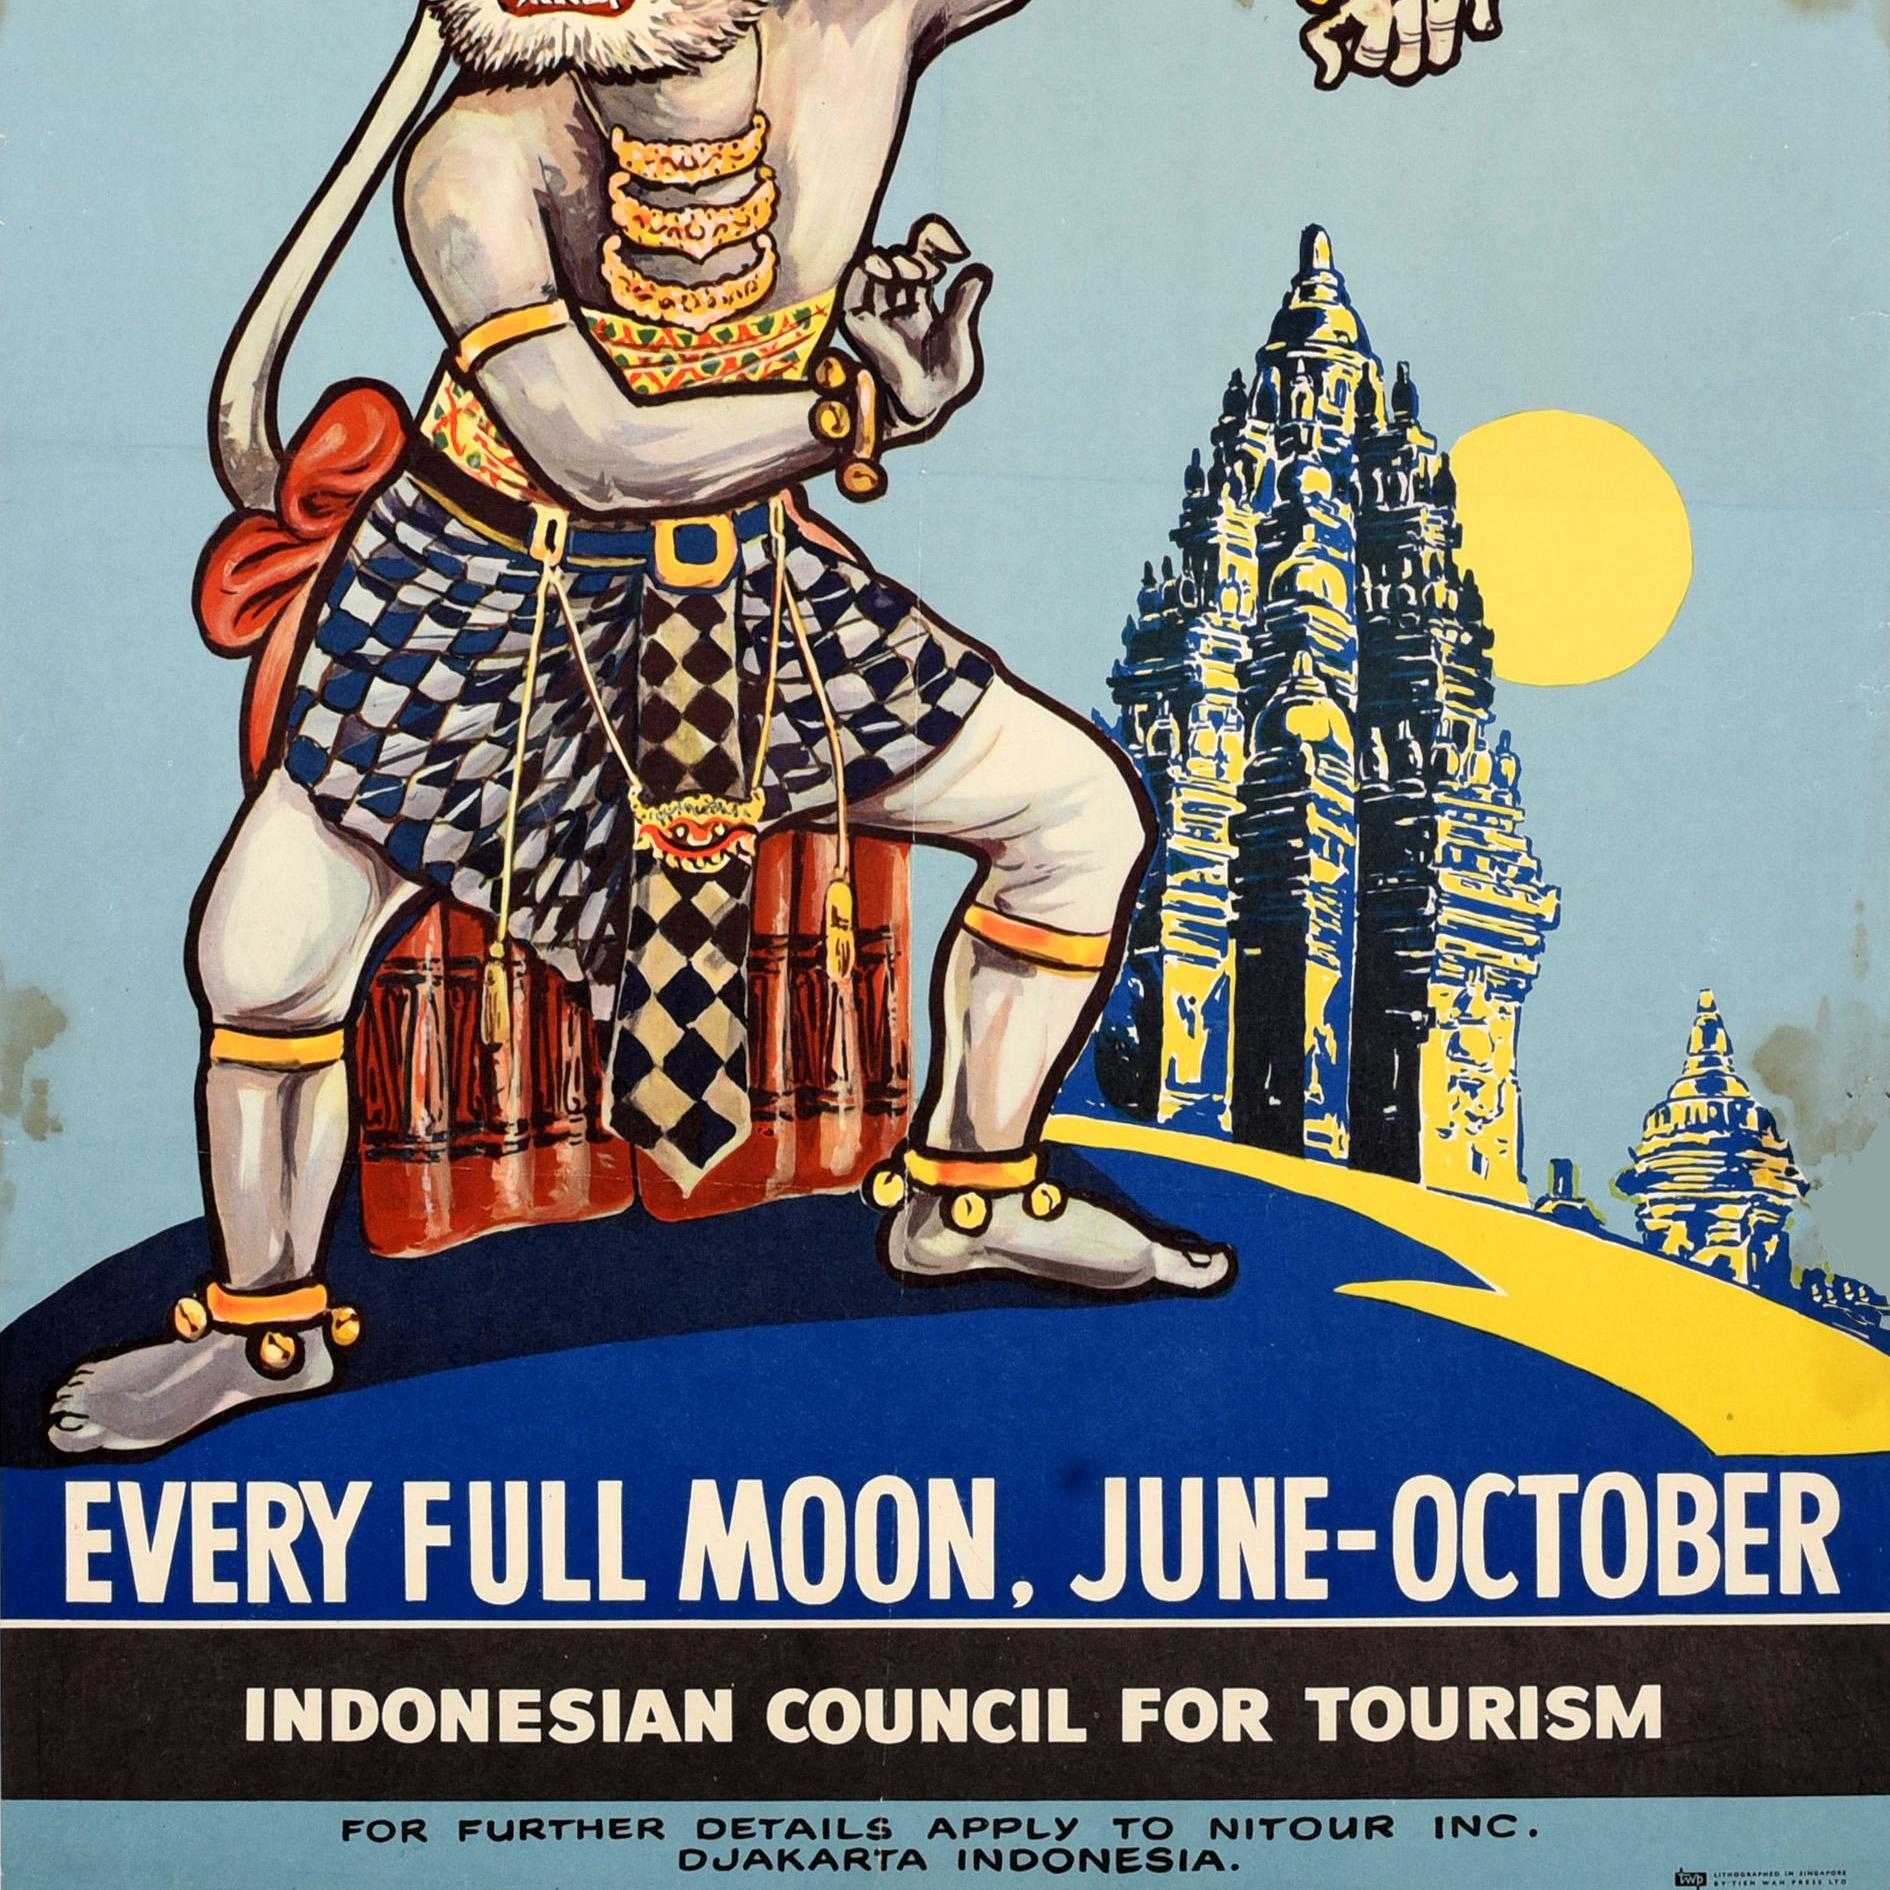 Original vintage travel advertising poster for the Ramayana Ballet Festival Indonesia every full moon June-October featuring a monkey god dance performance with an ancient temple and a bright moon shining in the background, the text on the side